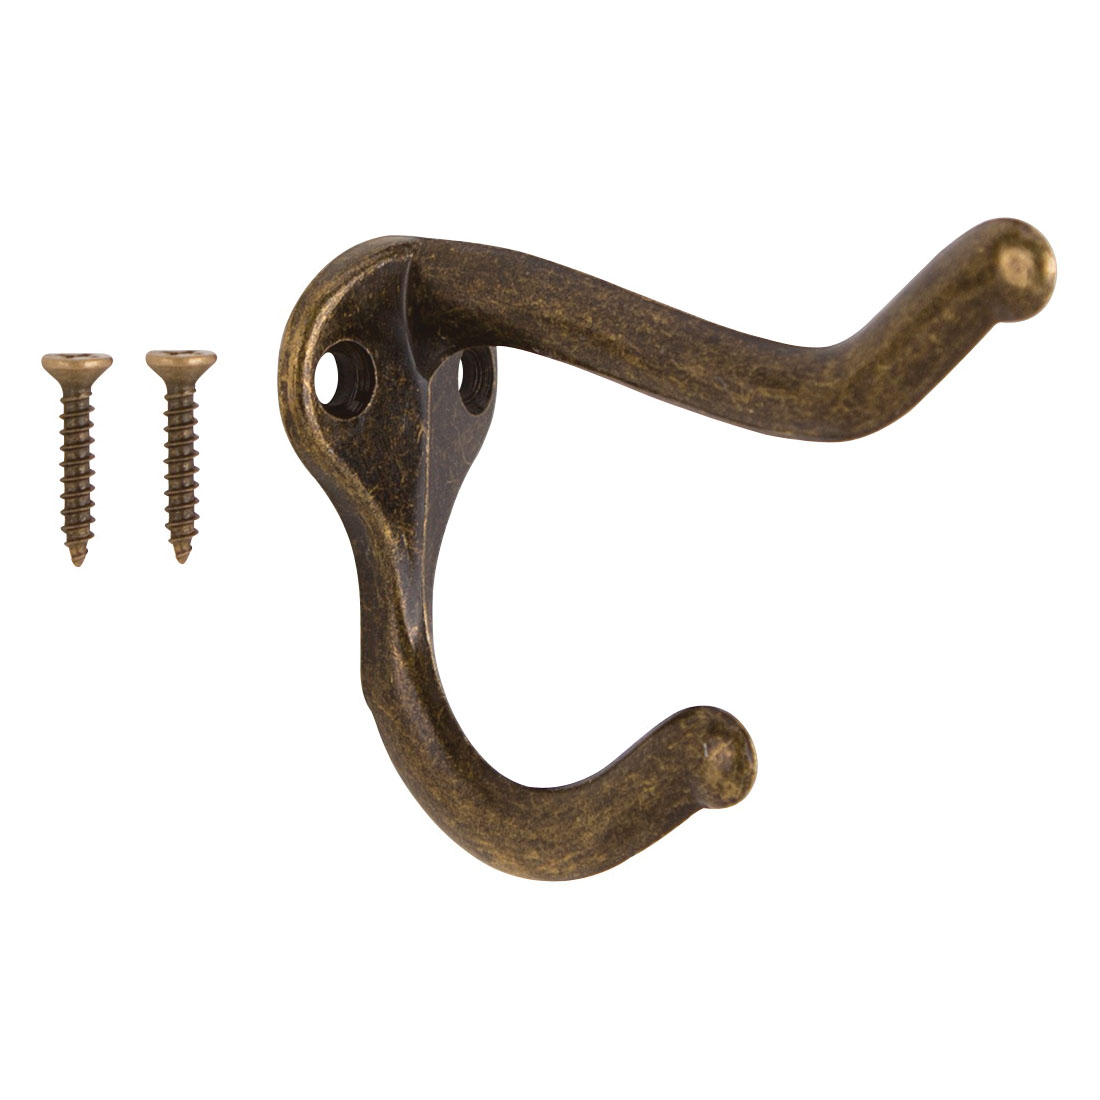 H62-B071 Coat and Hat Hook, 22 lb, 2-Hook, 1 in Opening, Zinc, Antique Brass